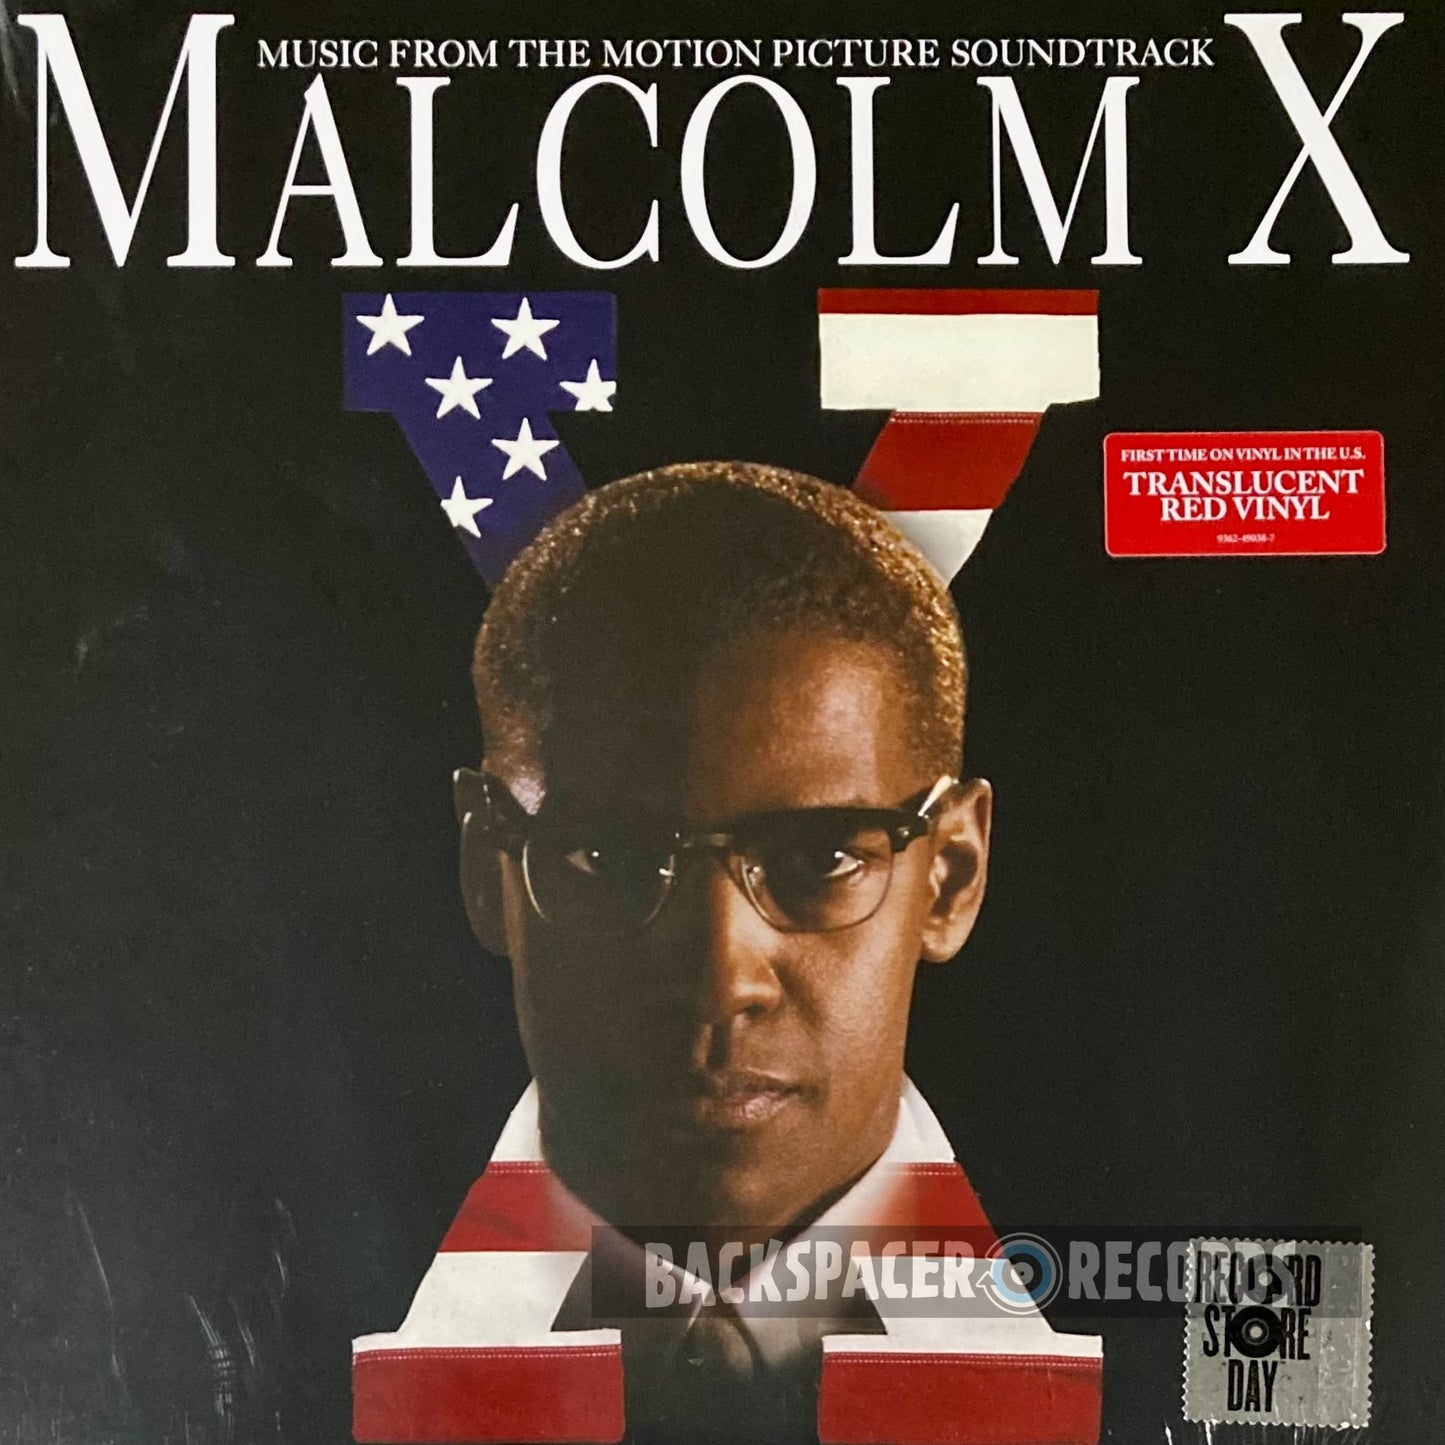 Malcolm X: Music From The Motion Picture Soundtrack - Various Artists (Limited Edition) LP (Sealed)